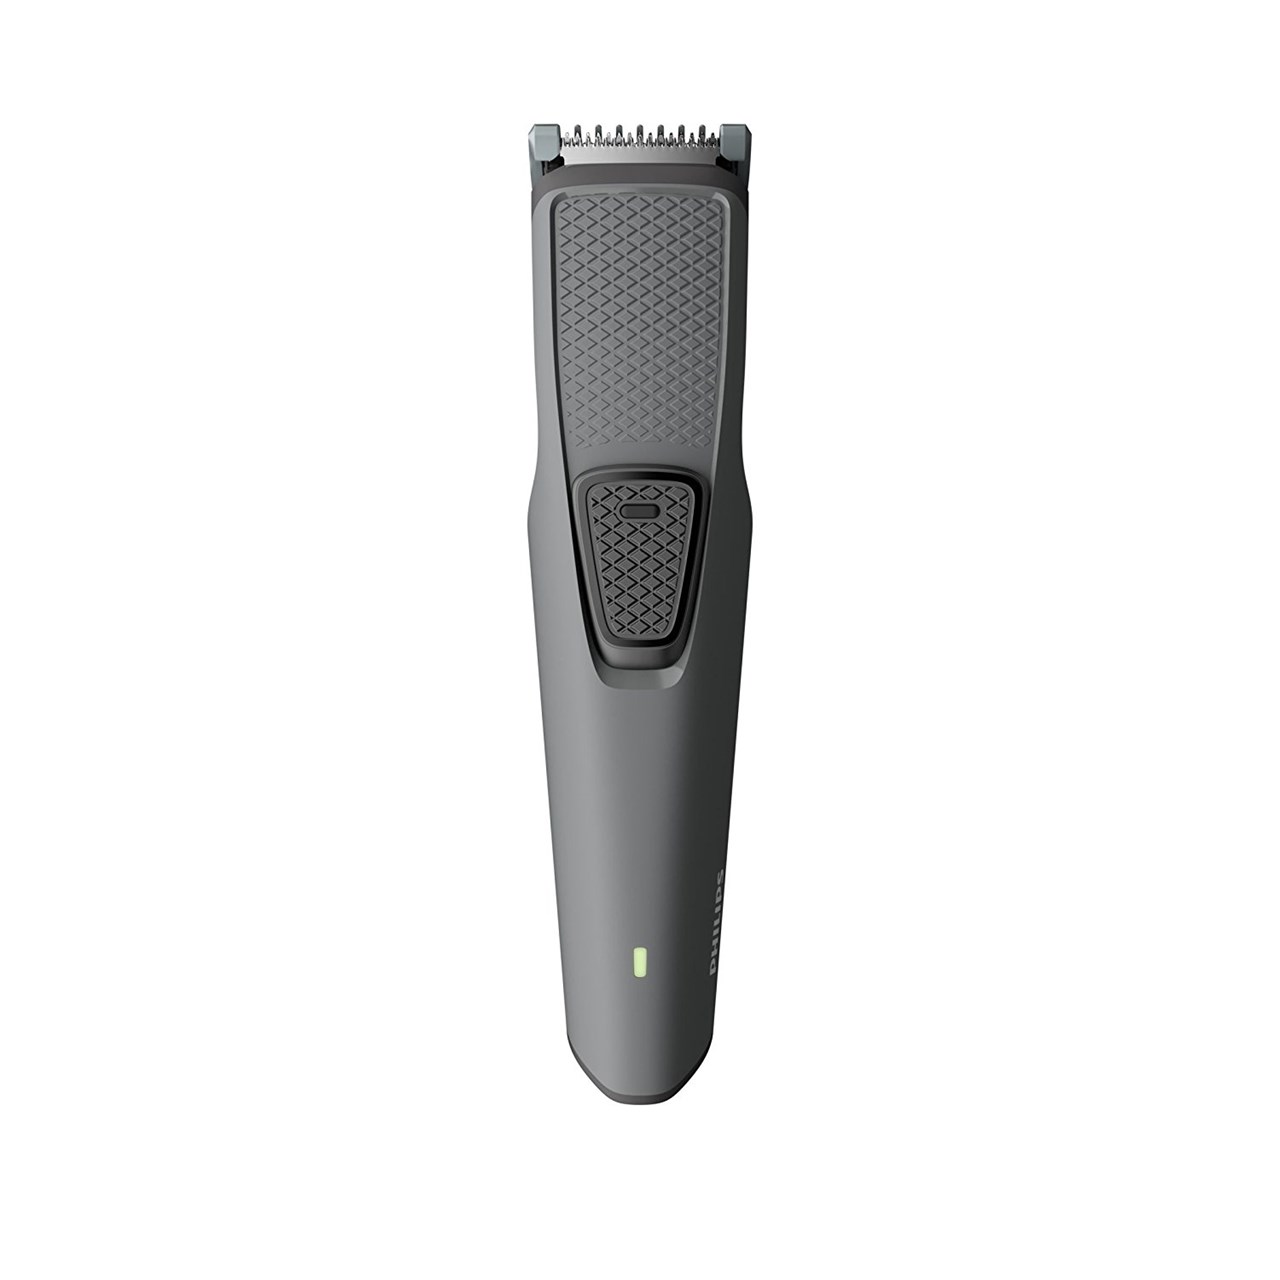 latest trimmer from philips